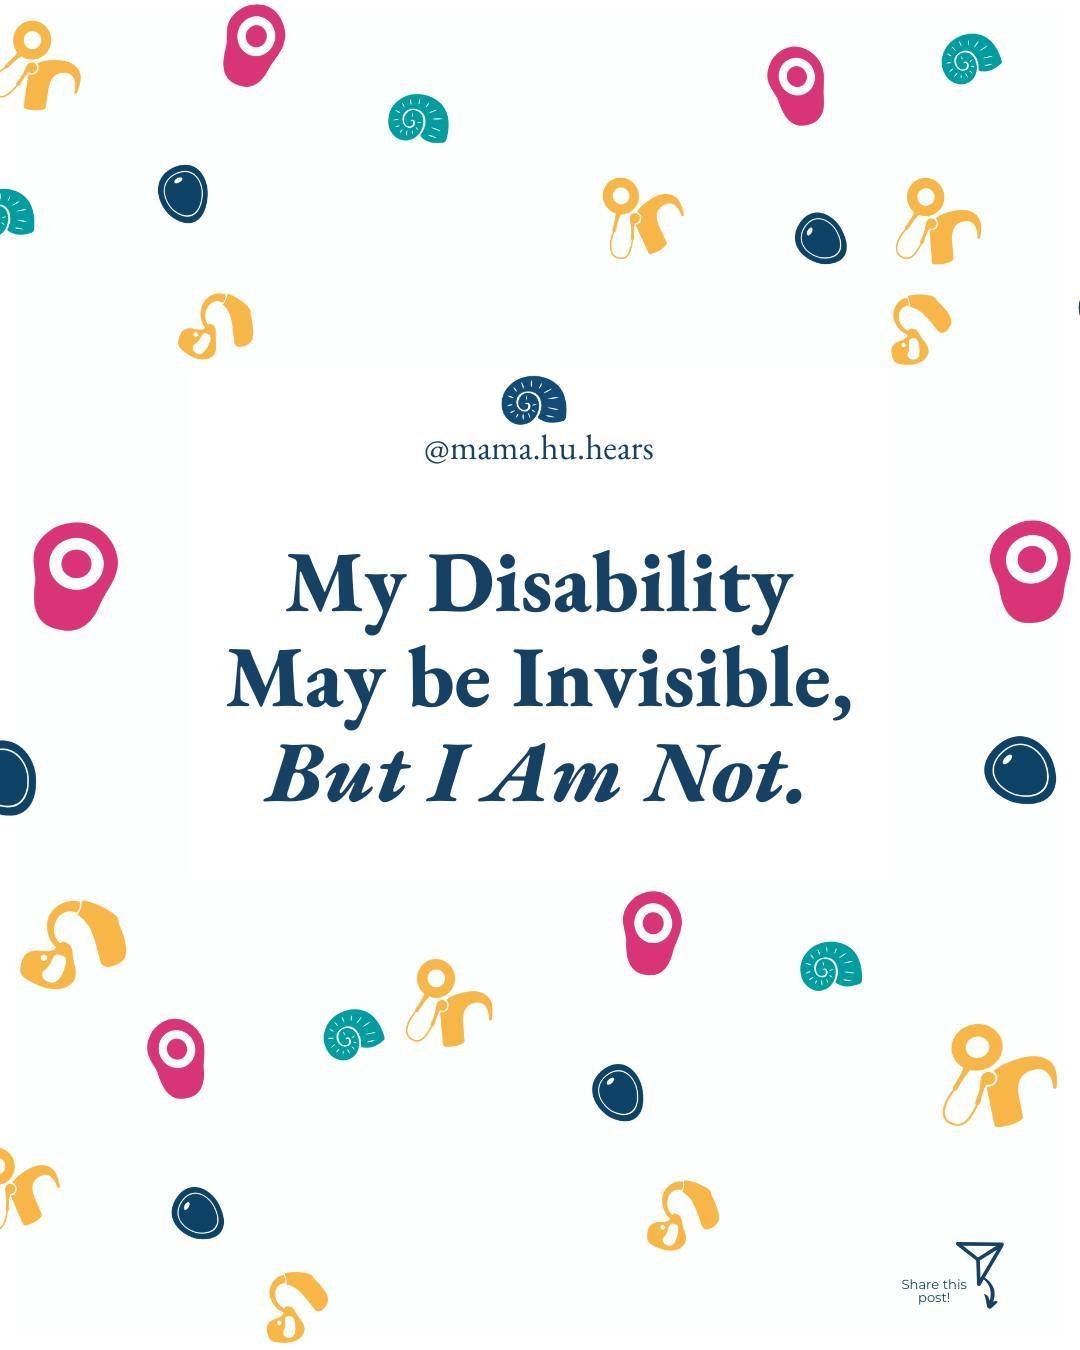 My disability may be invisible, but I am not.

How does this statement make you feel?

Empowered? Angry? Overwhelmed? It used to make me feel sad, isolated, disempowered and honestly like I was at a disadvantage. Sometimes I was happy that my hearing